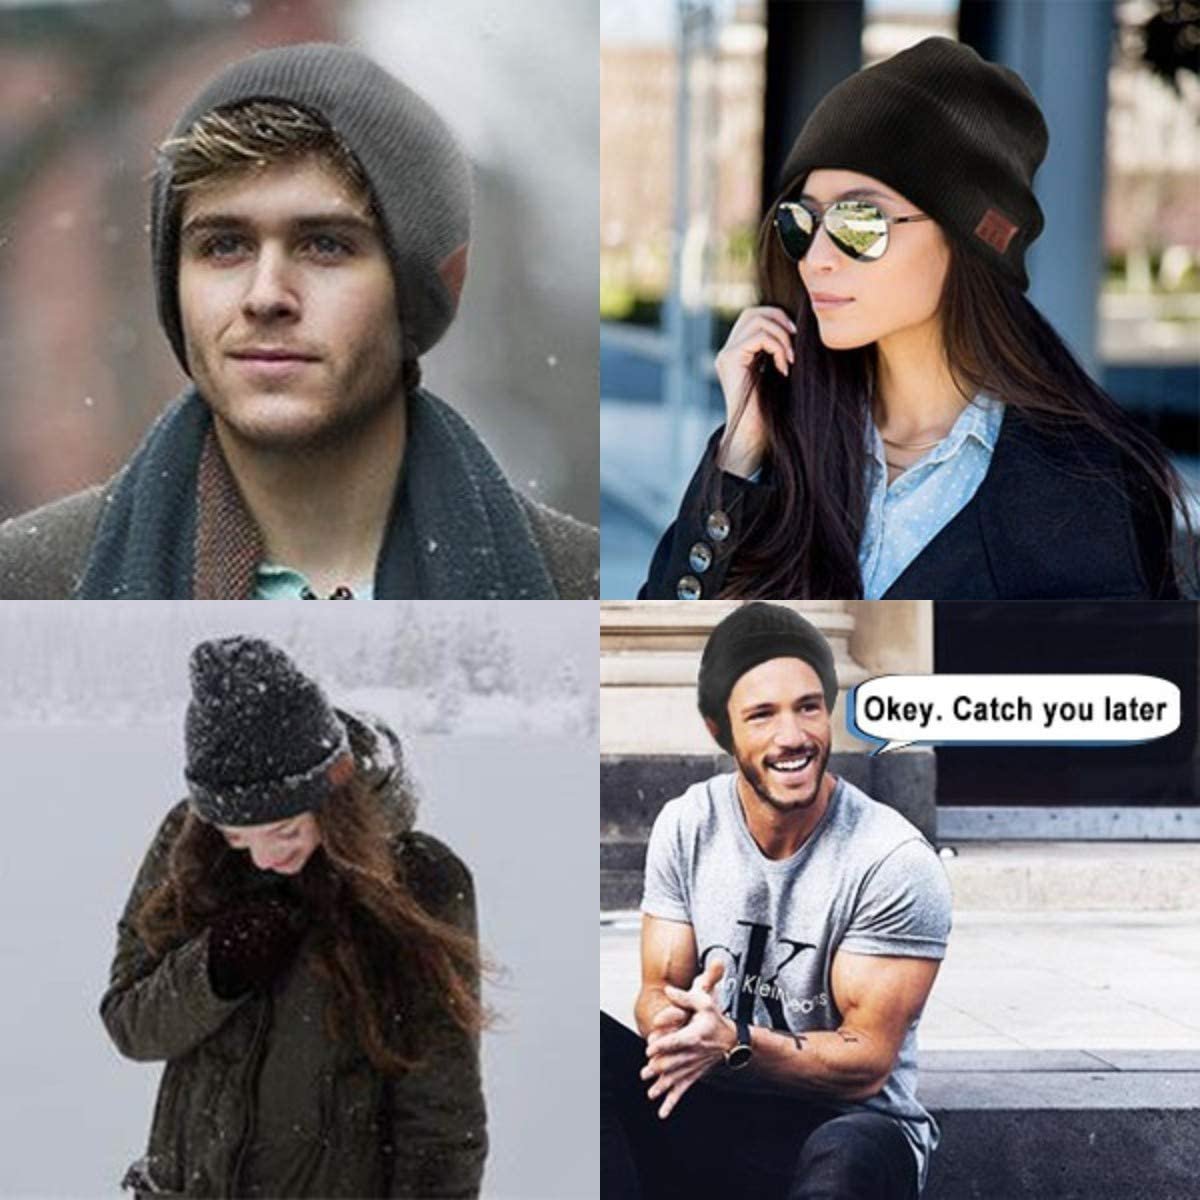 Bluetooth Beanie Hat for Men Women, Upgraded Wireless Bluetooth 5.0 Beanie Hat with Headphones Headset Earphone Knitted Beanie with Stereo Speakers and Mic for Women Men - image 4 of 9